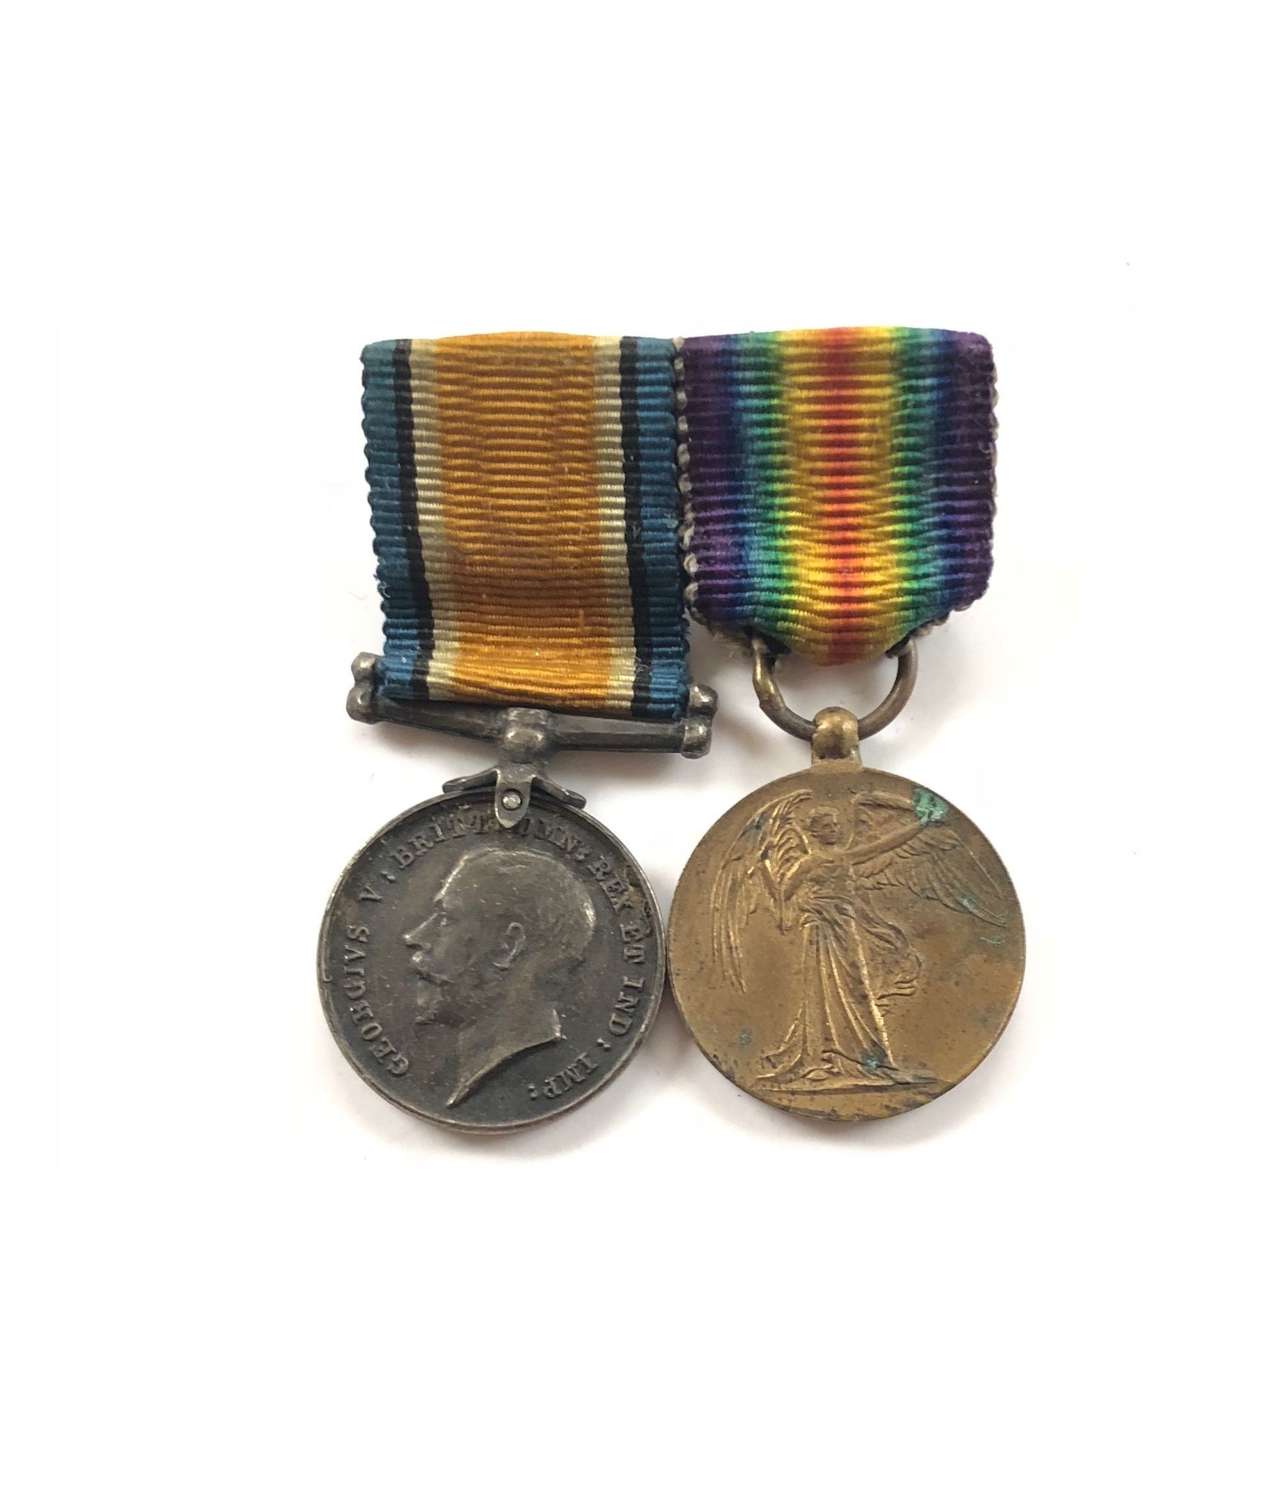 WW1 MINIATURE Pair of Medals.